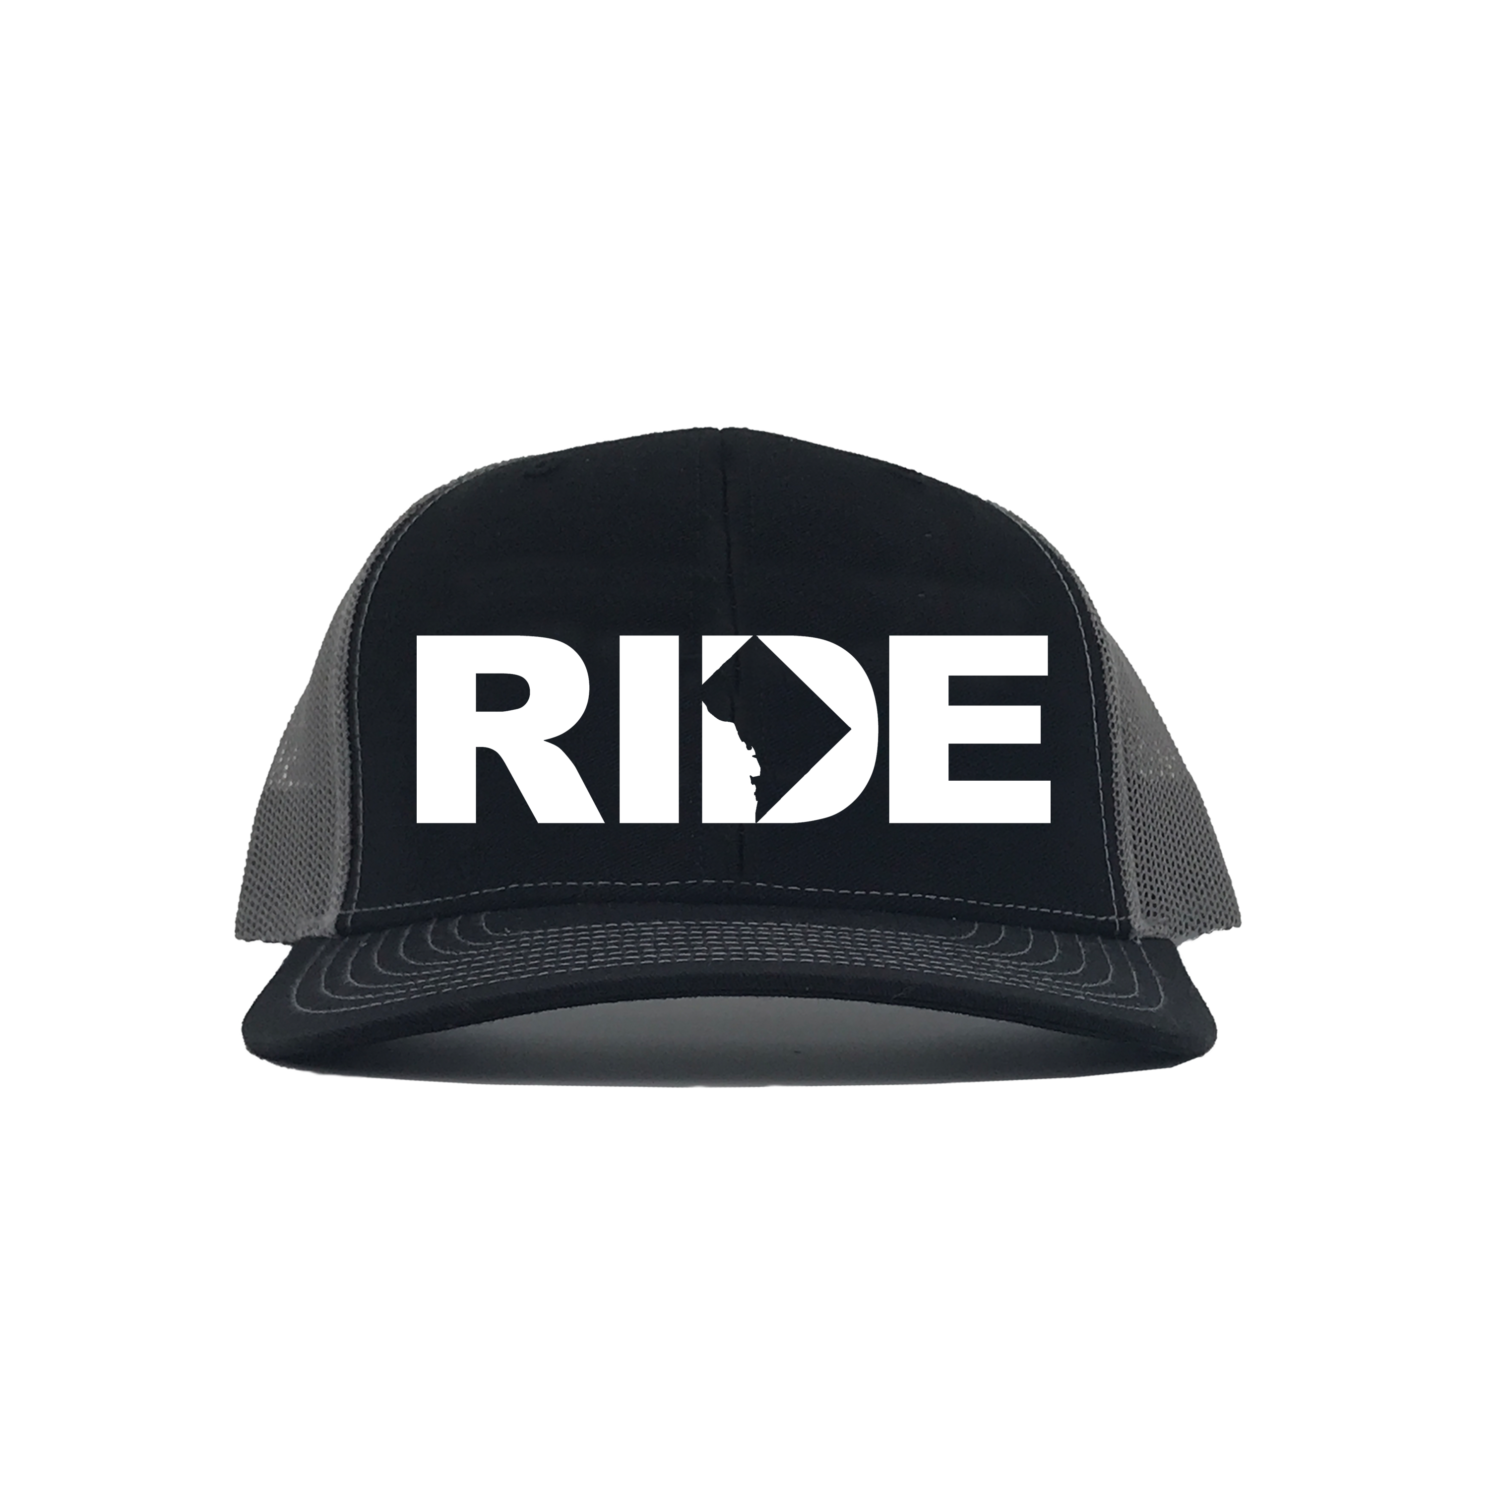 Ride District of Columbia Classic Embroidered Snapback Trucker Hat Black/Gray